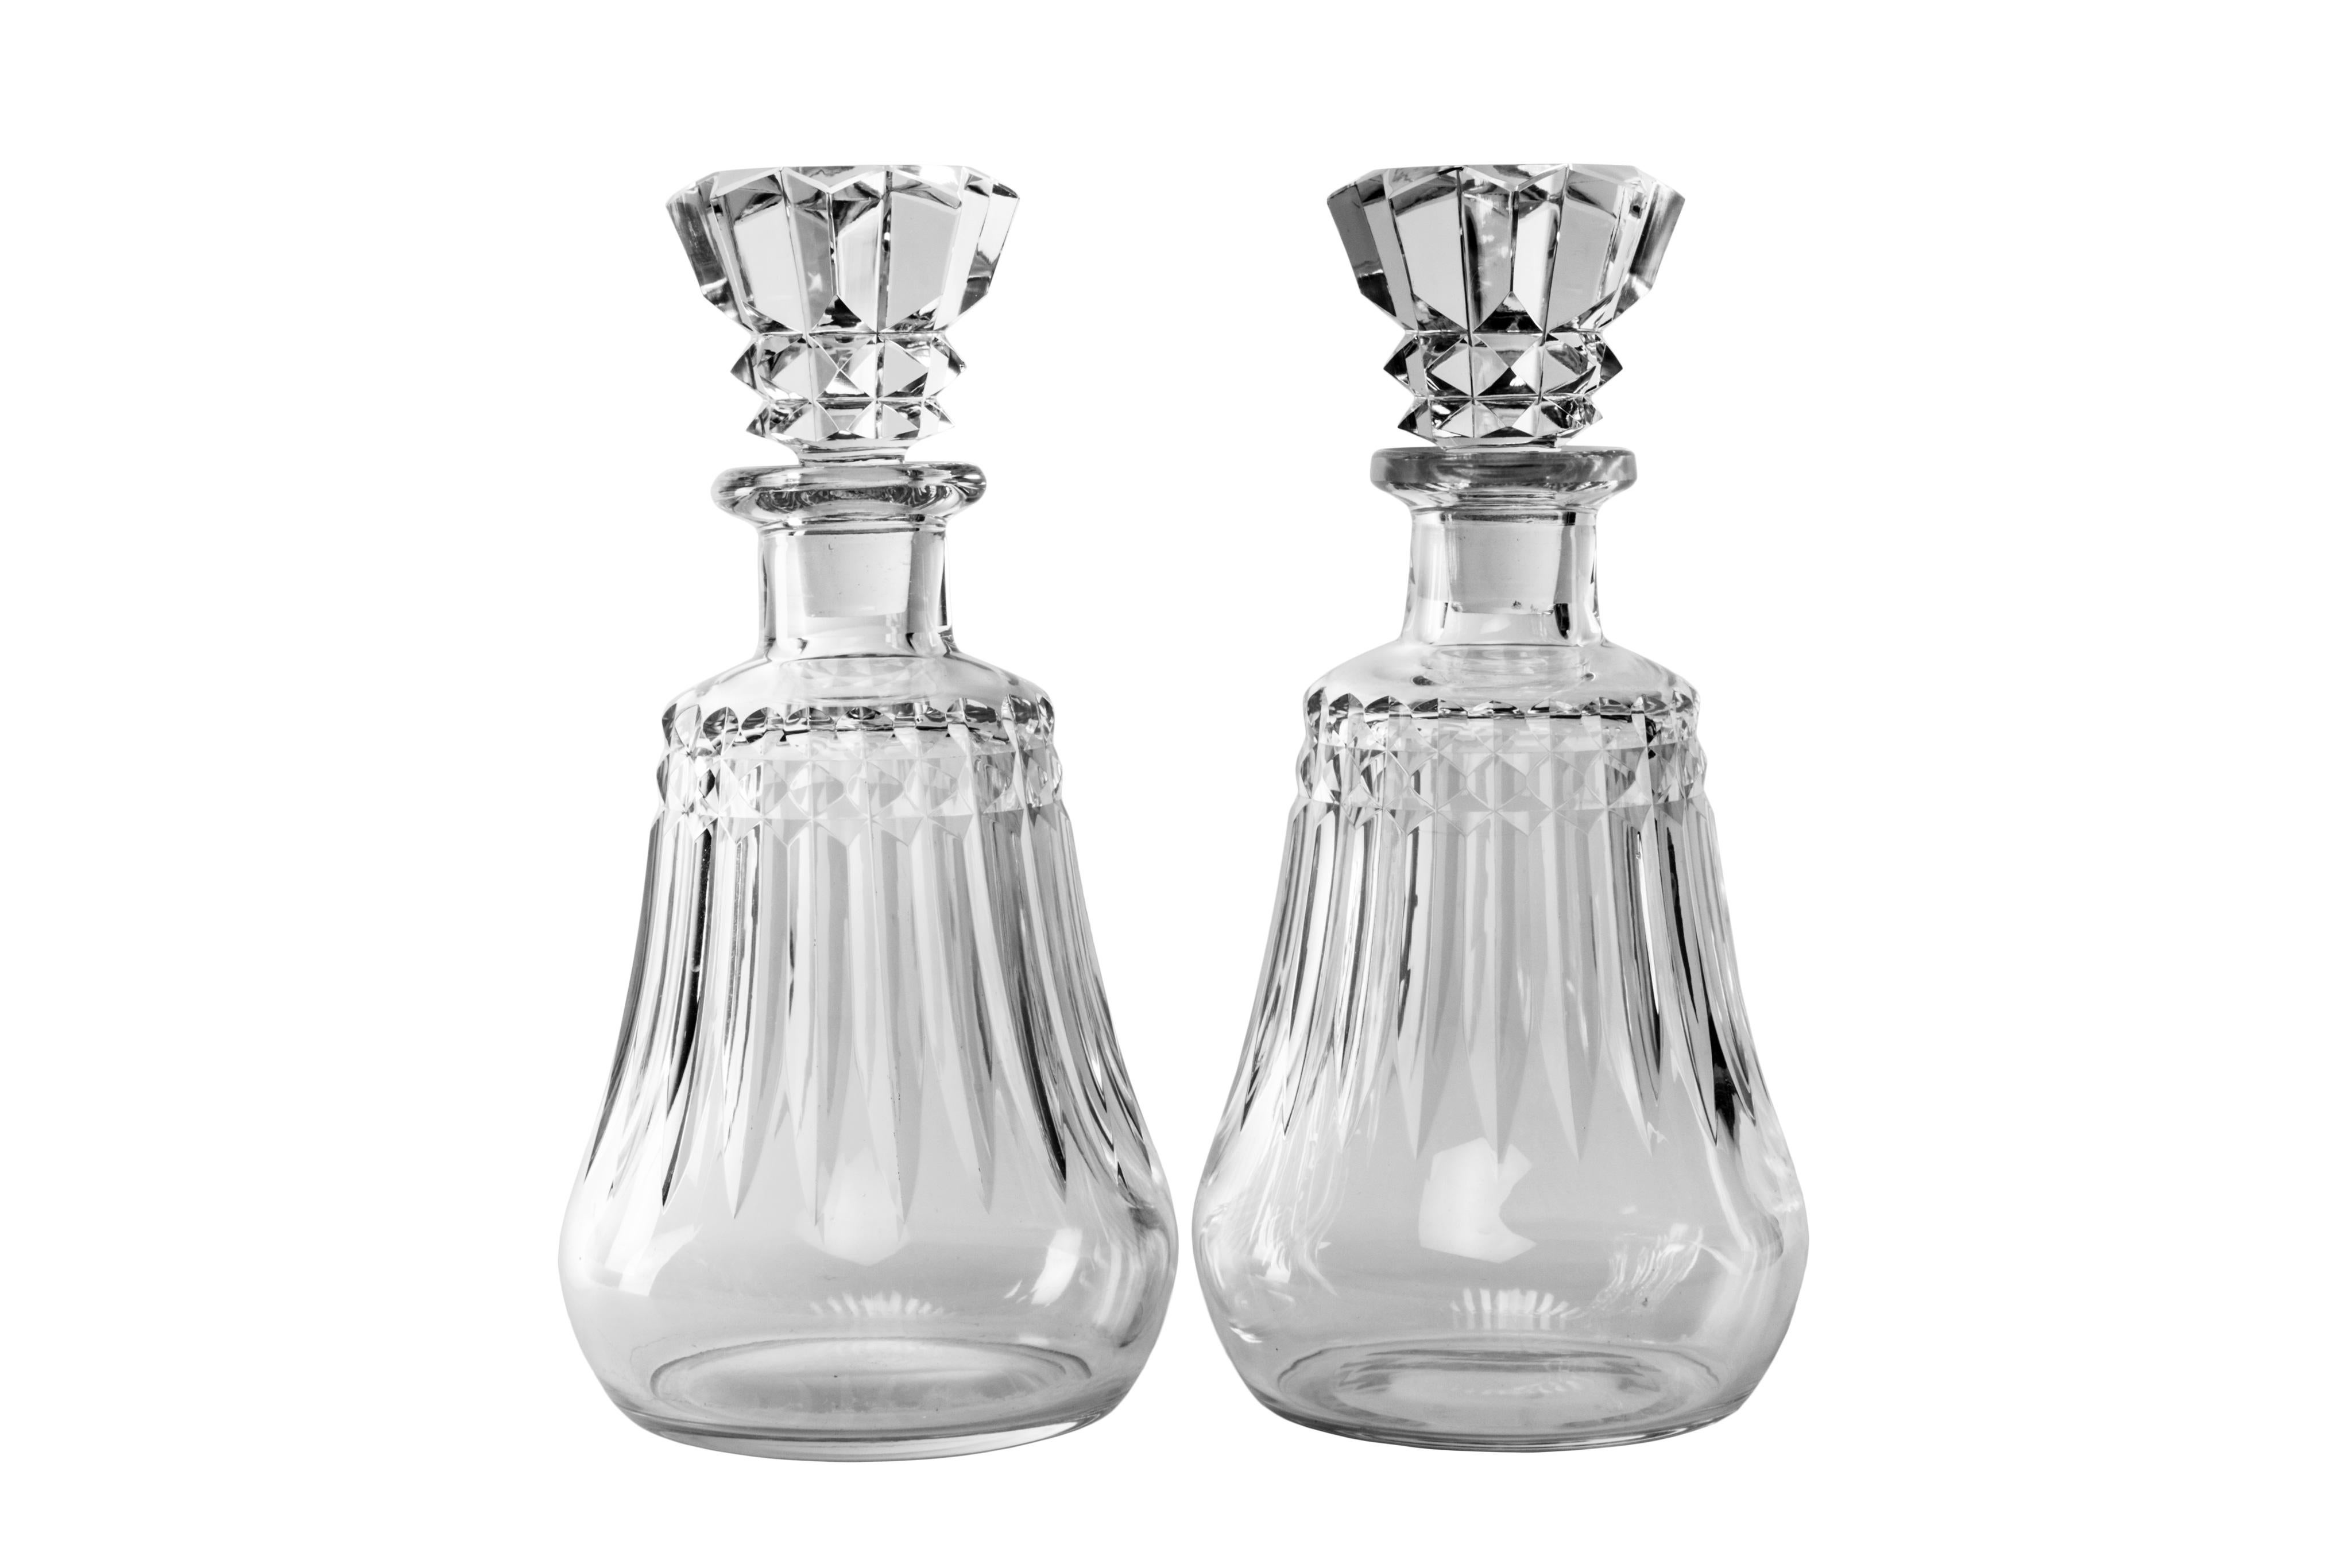 A gorgeous pair of Baccarat decanters available to buy individually or separate. A powerful pair to any bar.